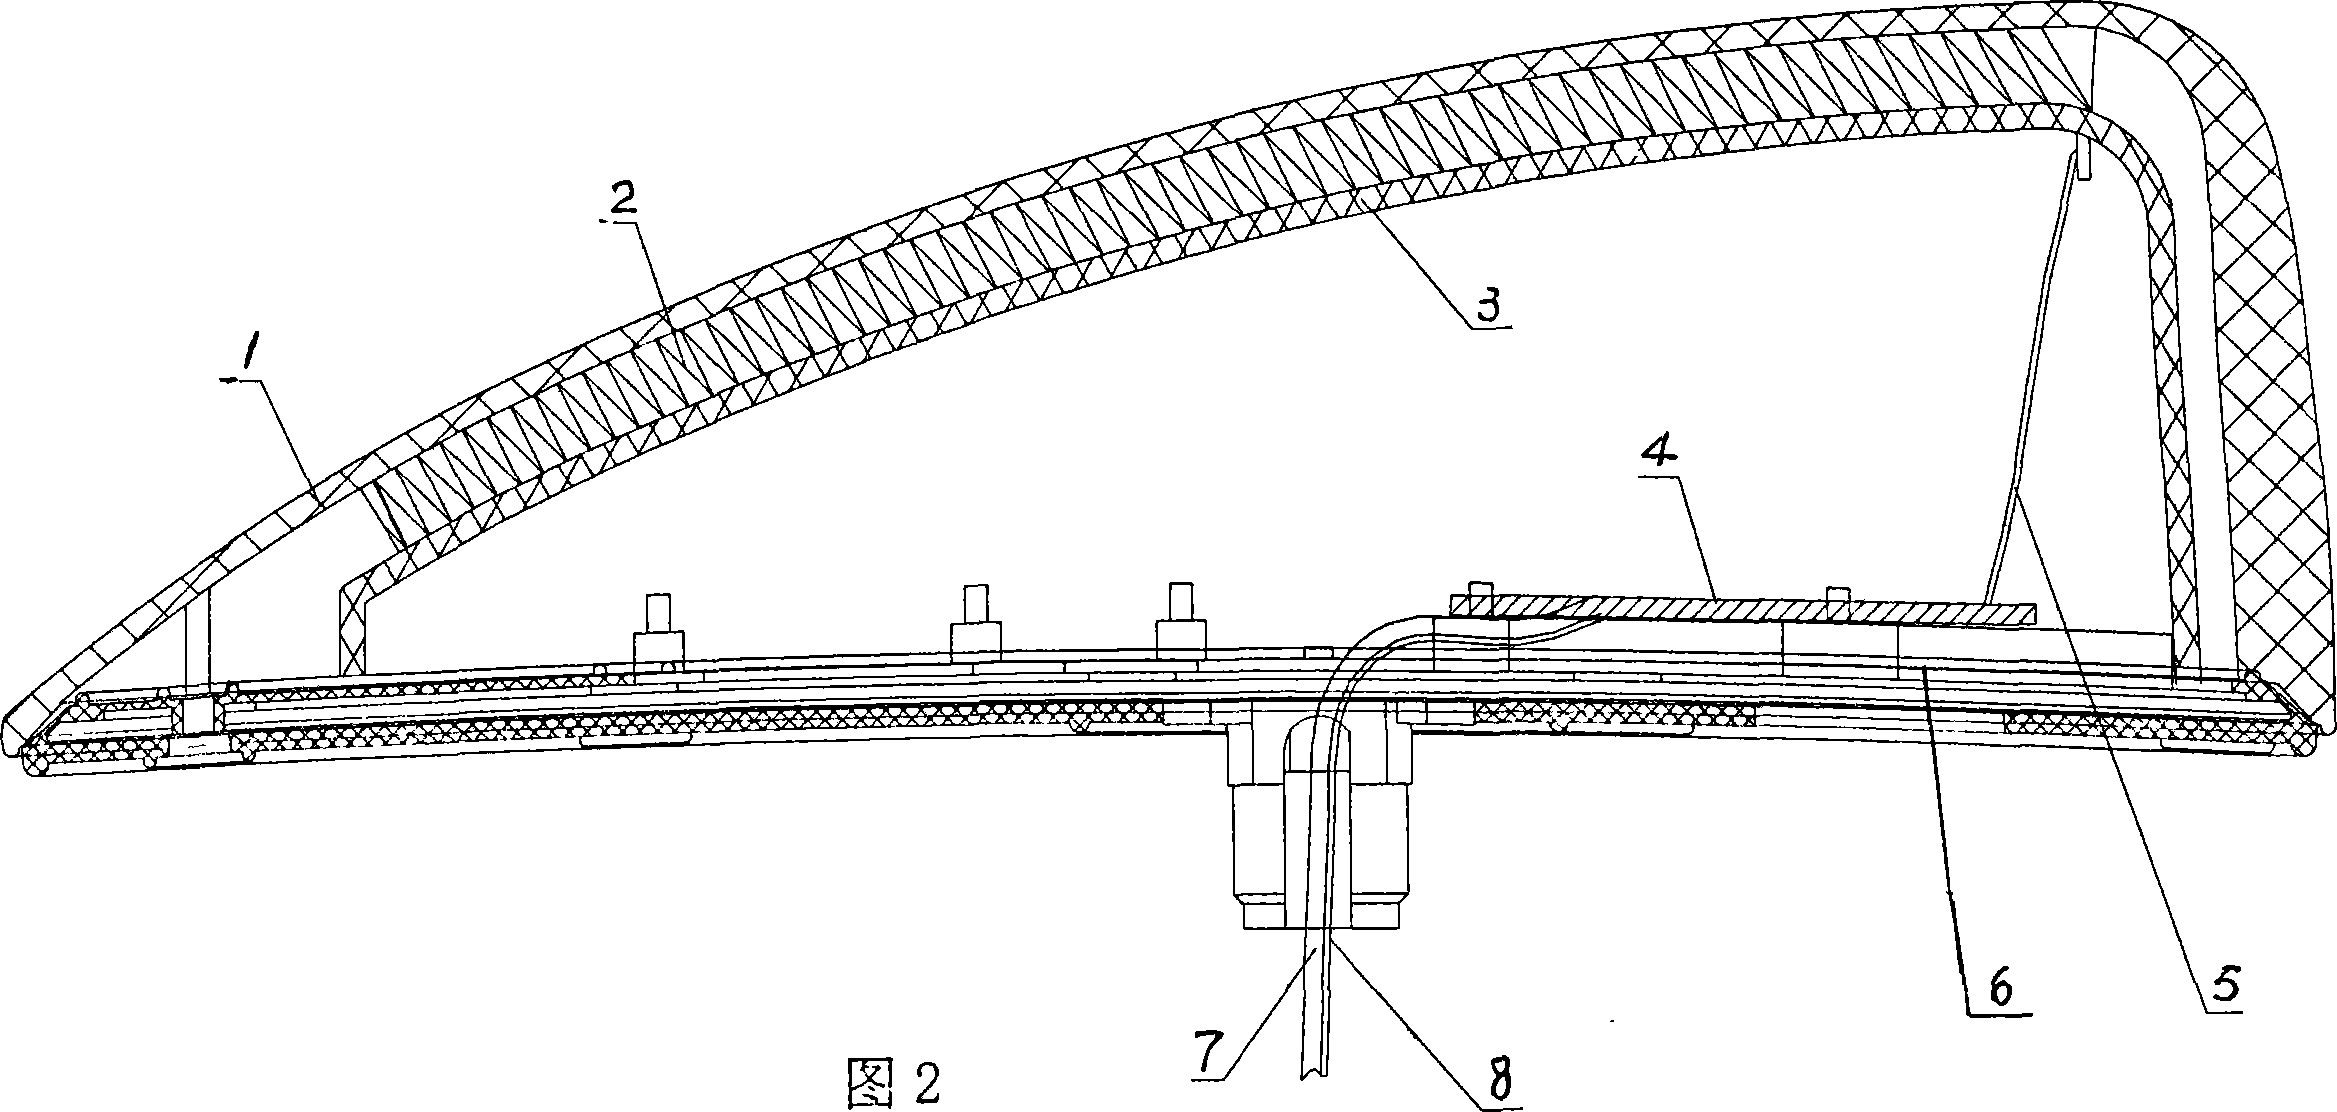 An upper laid aerial device of automobile